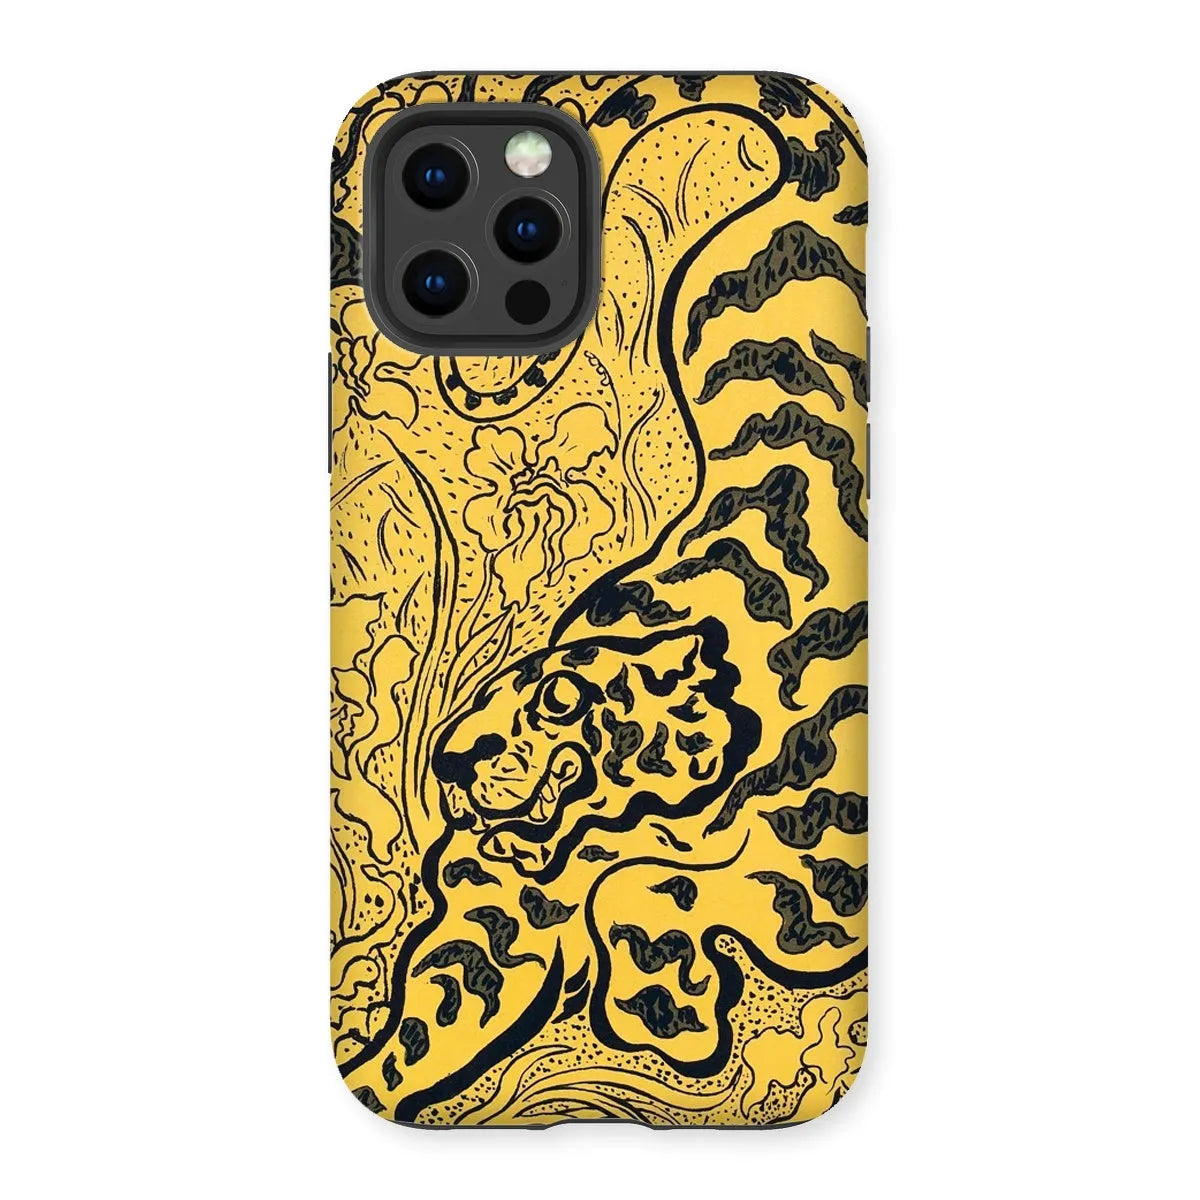 Tiger In The Jungle - Graphic Art Phone Case - Paul Ranson - Iphone 12 Pro / Matte - Mobile Phone Cases - Aesthetic Art